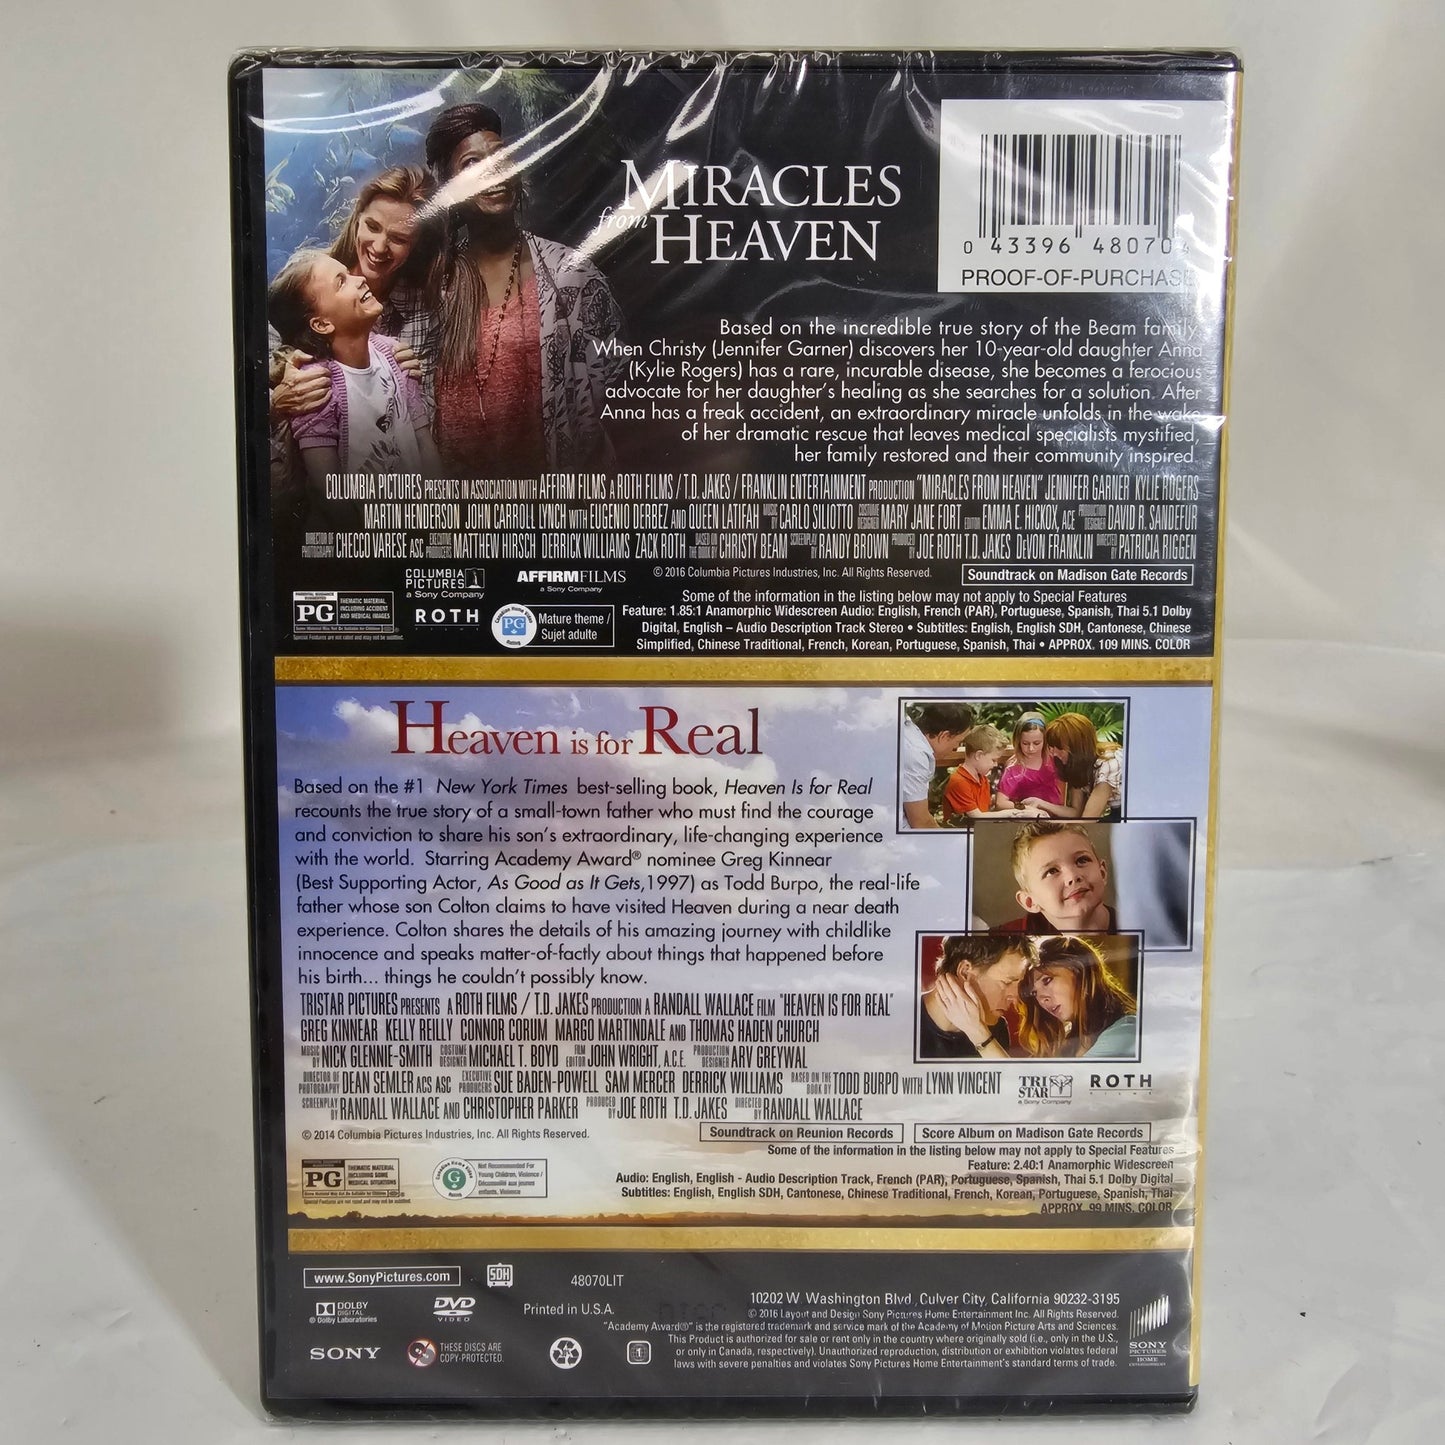 Miracles from Heaven / Heaven Is for Real - Double Feature DVD - DQ Distribution